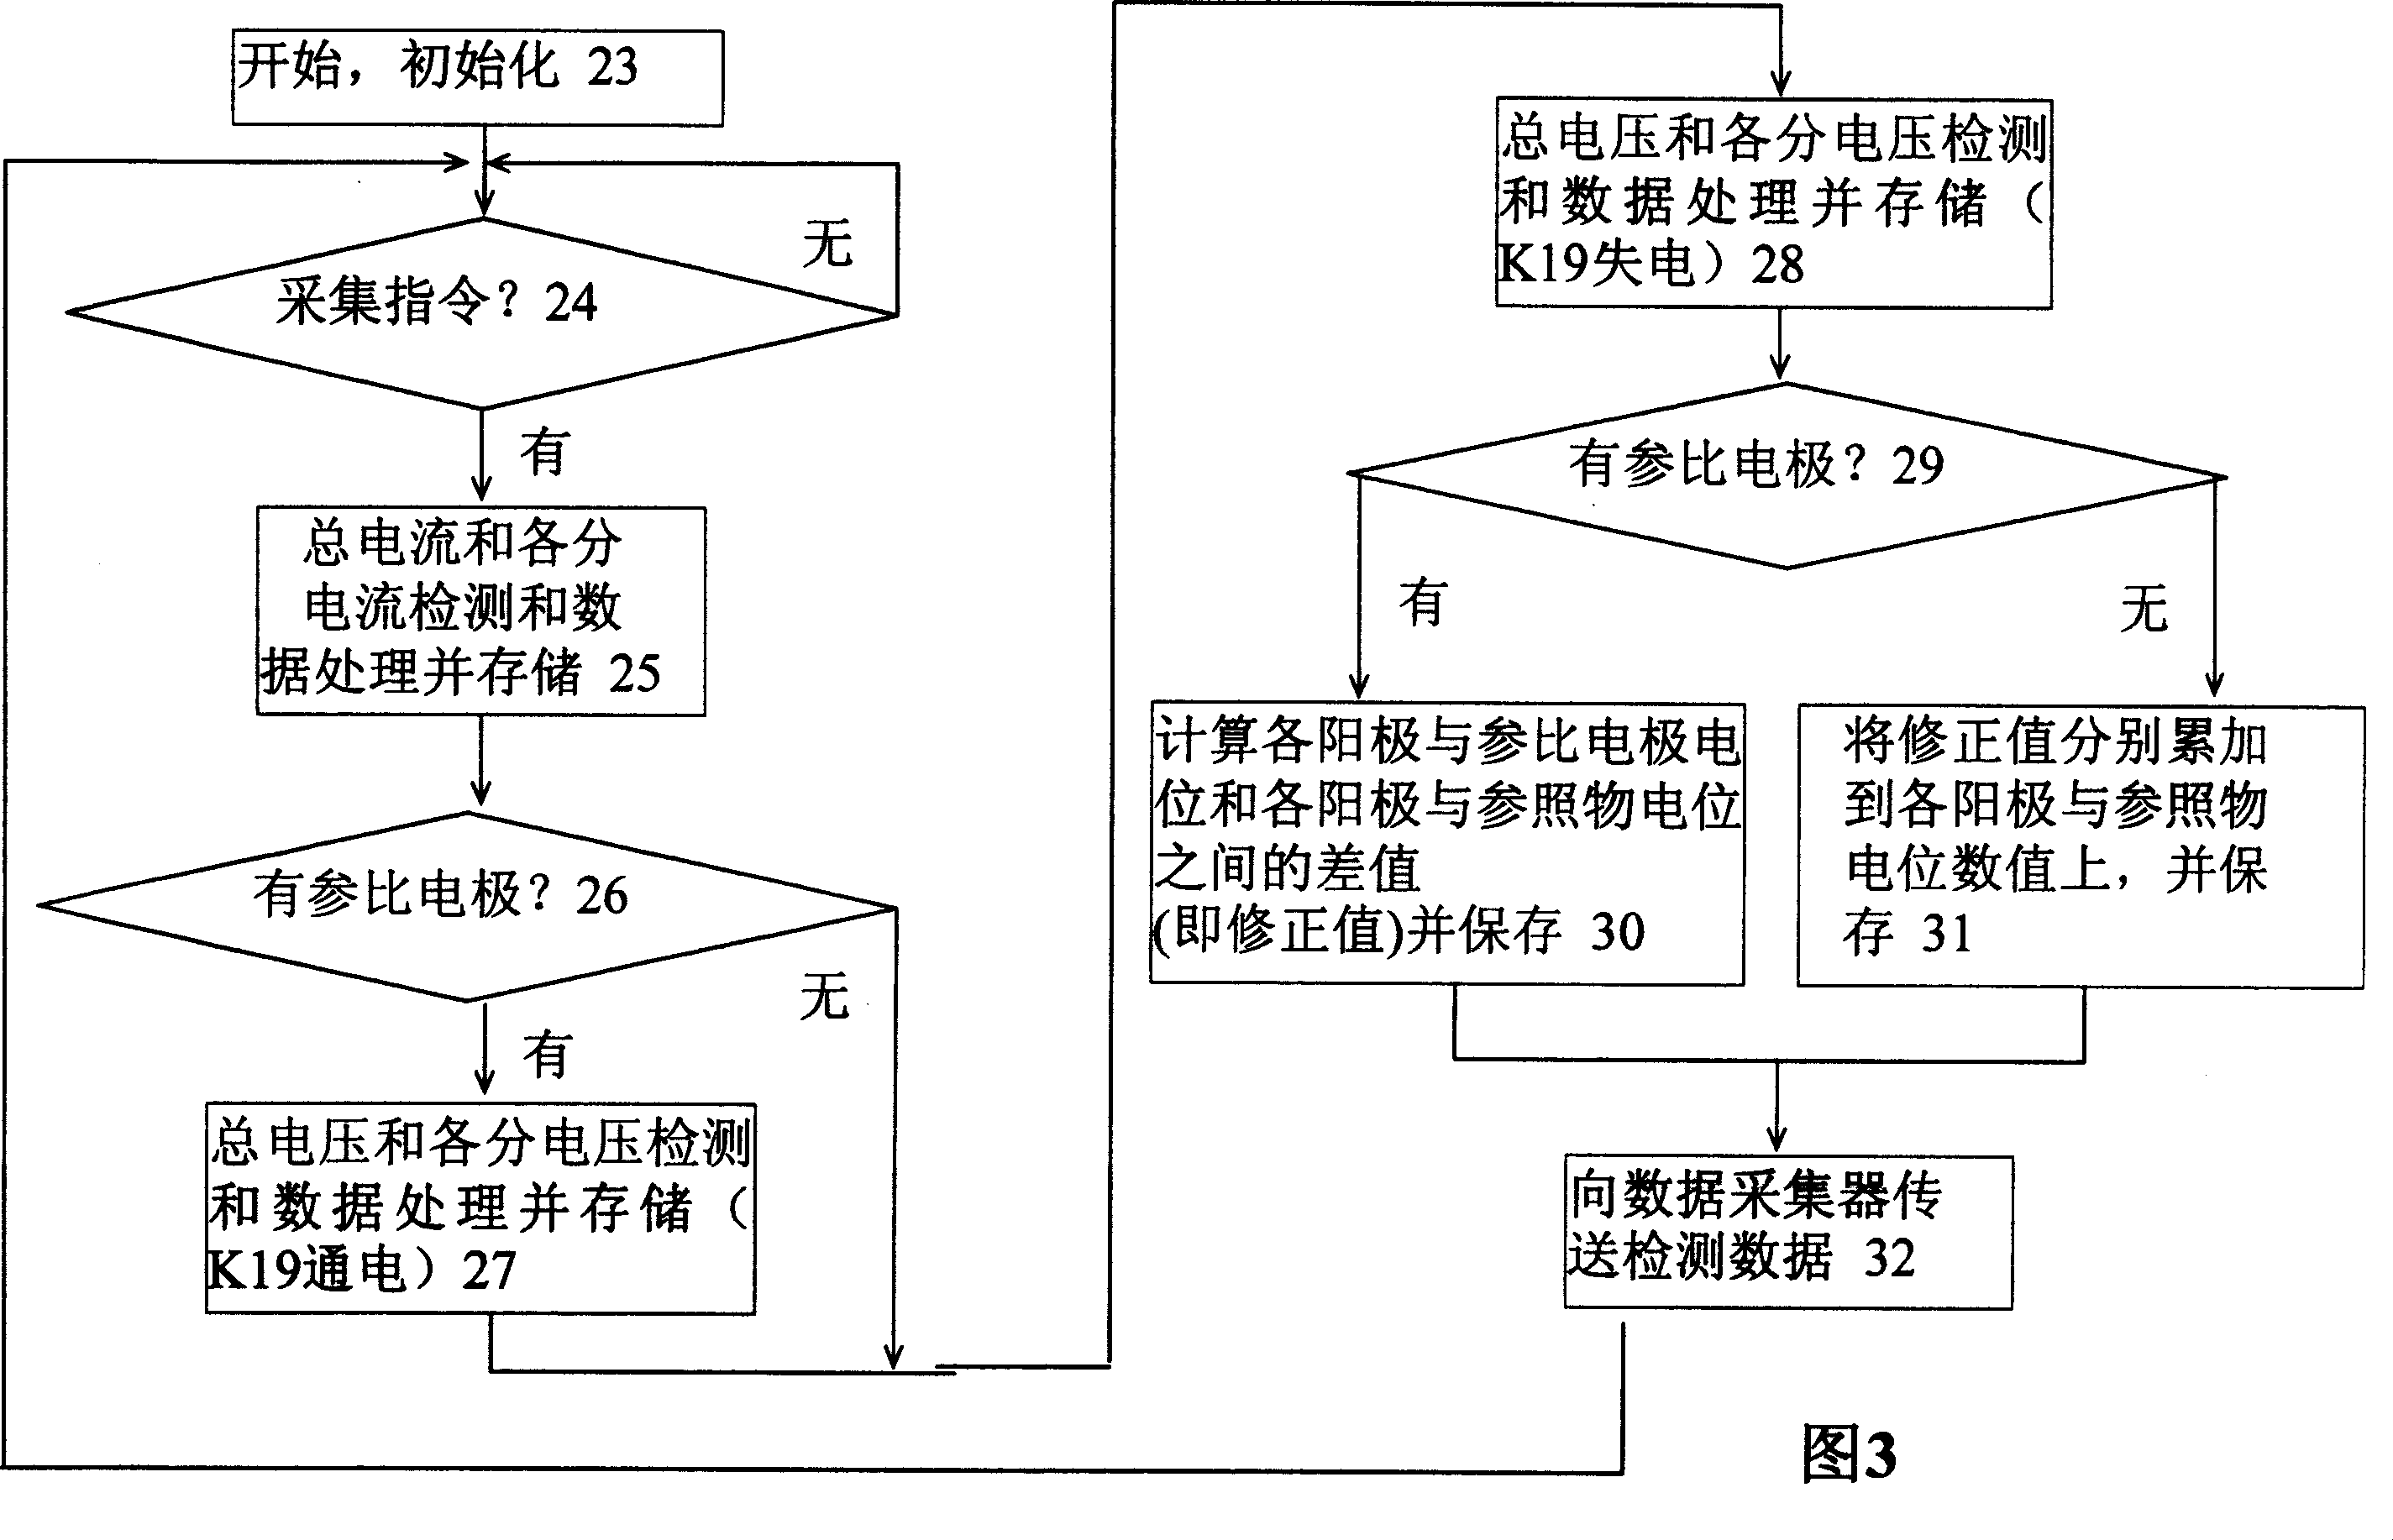 Sacrificial anode or cathod protected automatic detecting and treating system